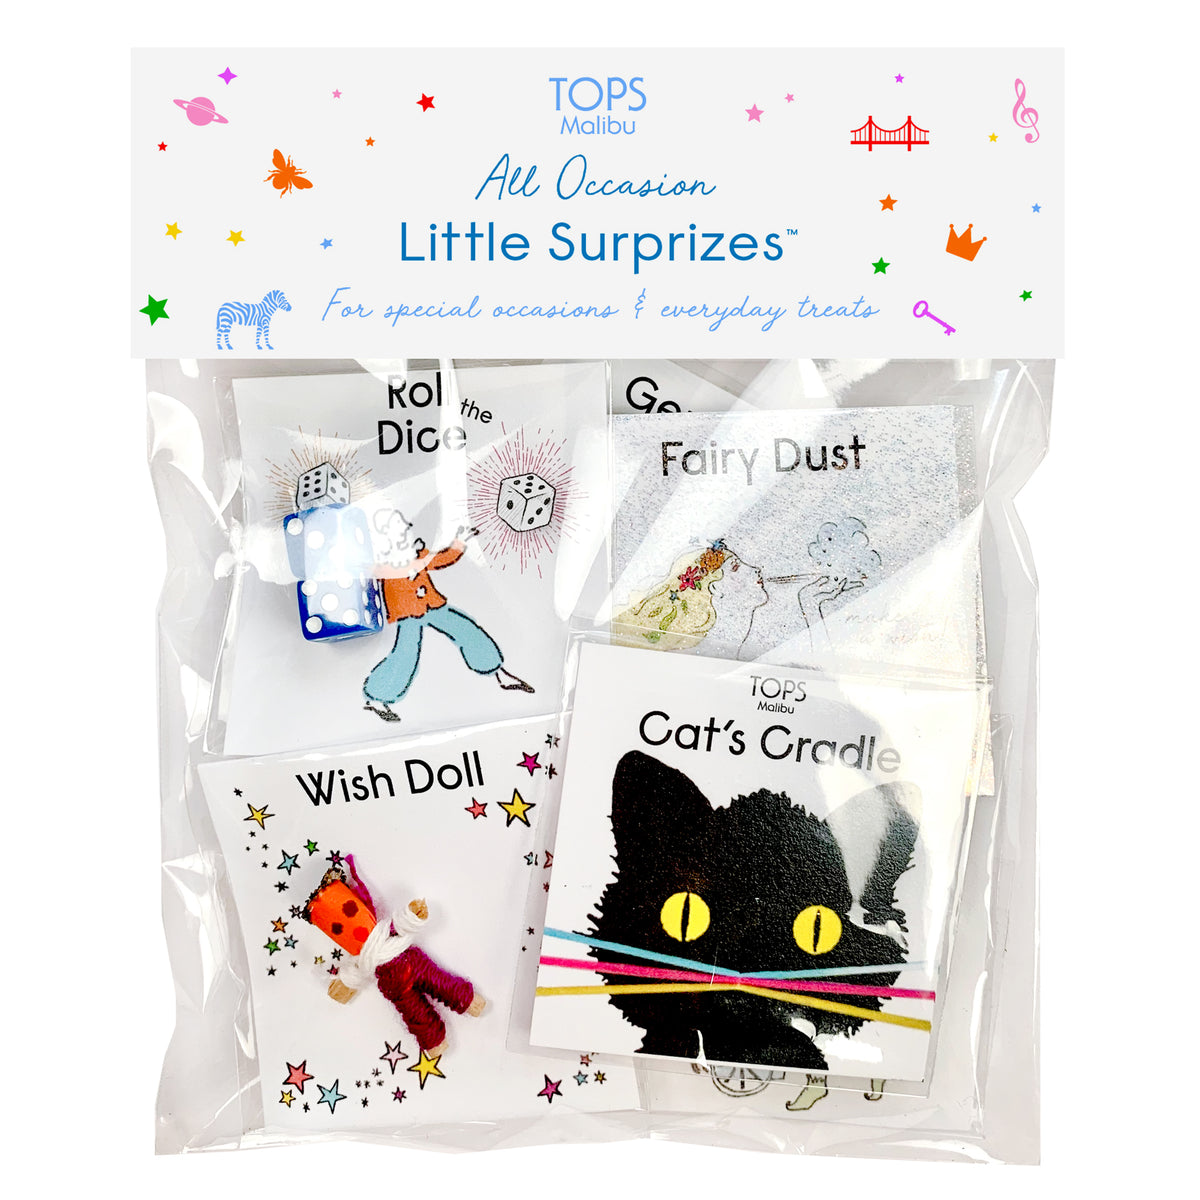 10 Little Surprizes™ All Occasion